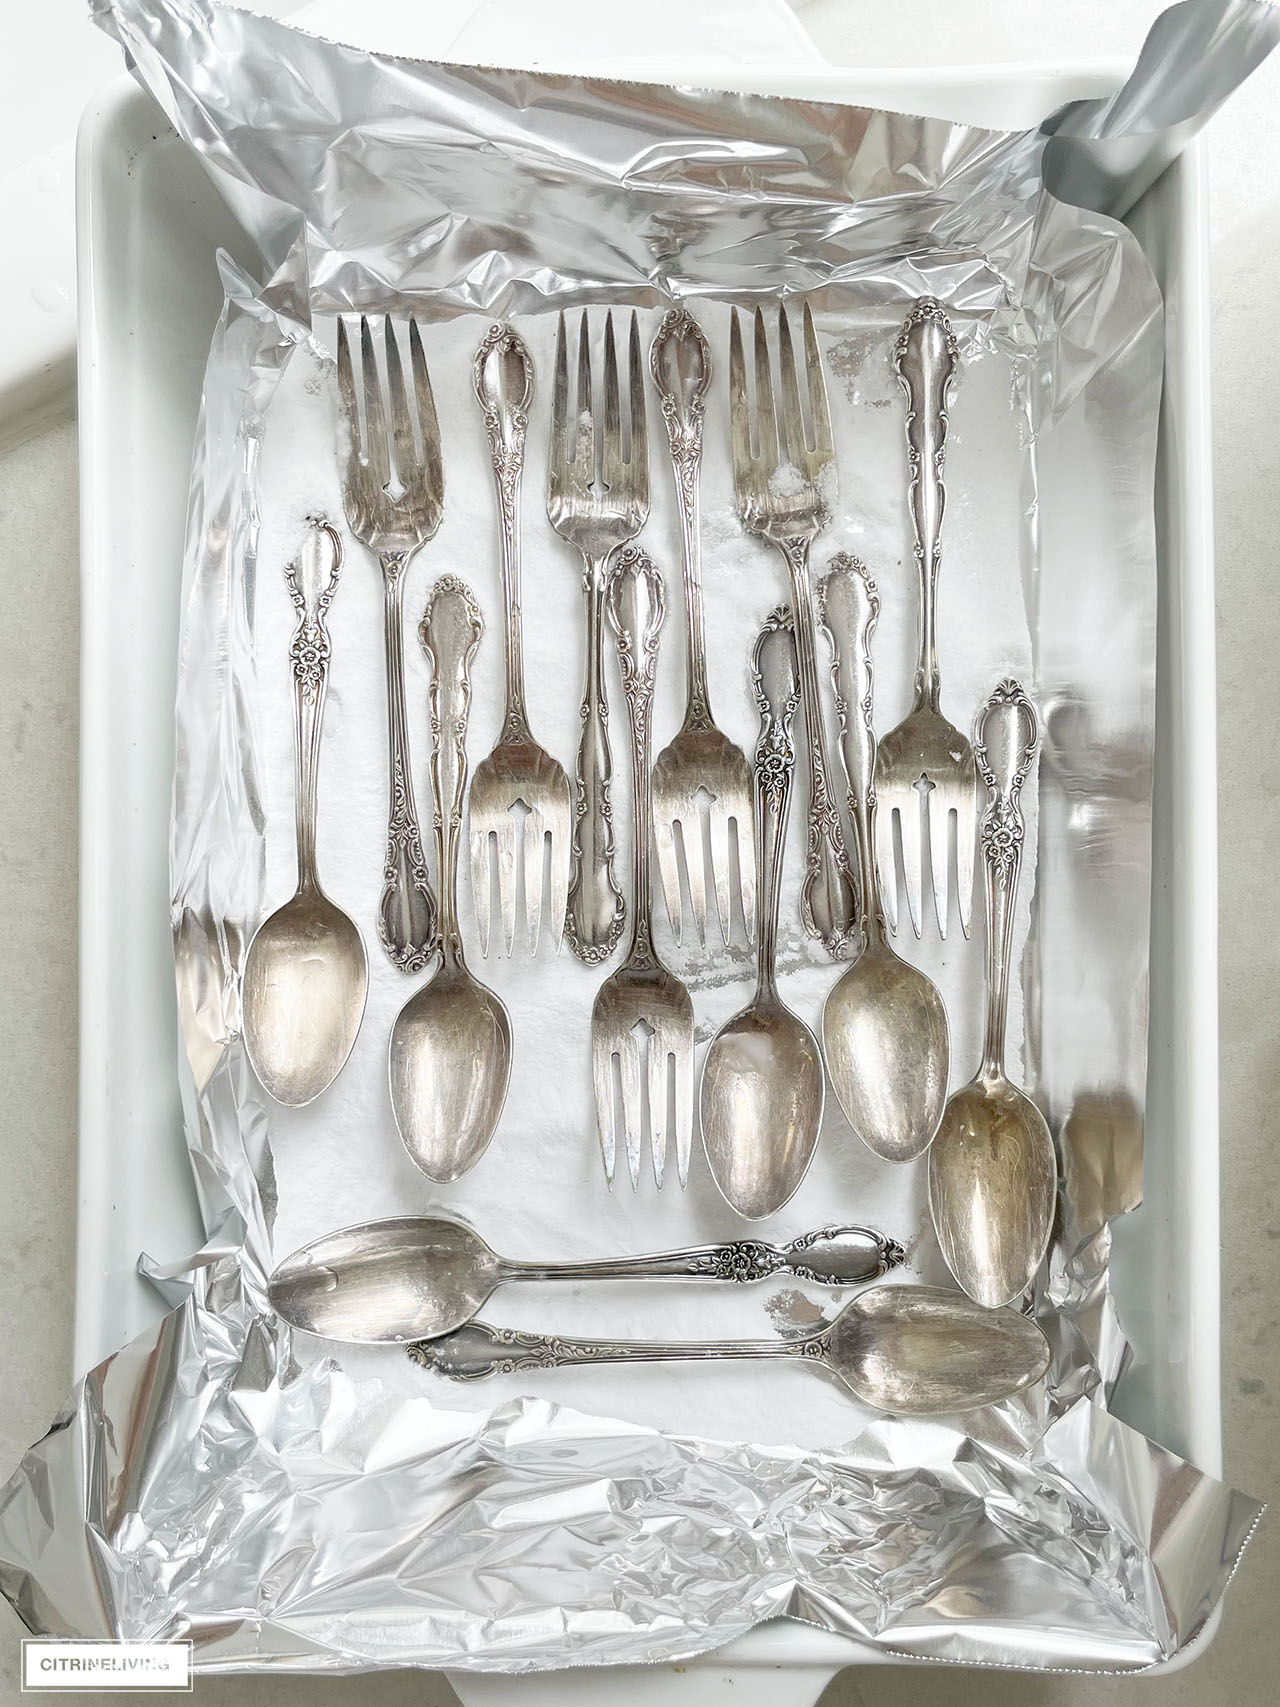 Best Method to Clean a lot of Silver Plated Silverware : r/CleaningTips